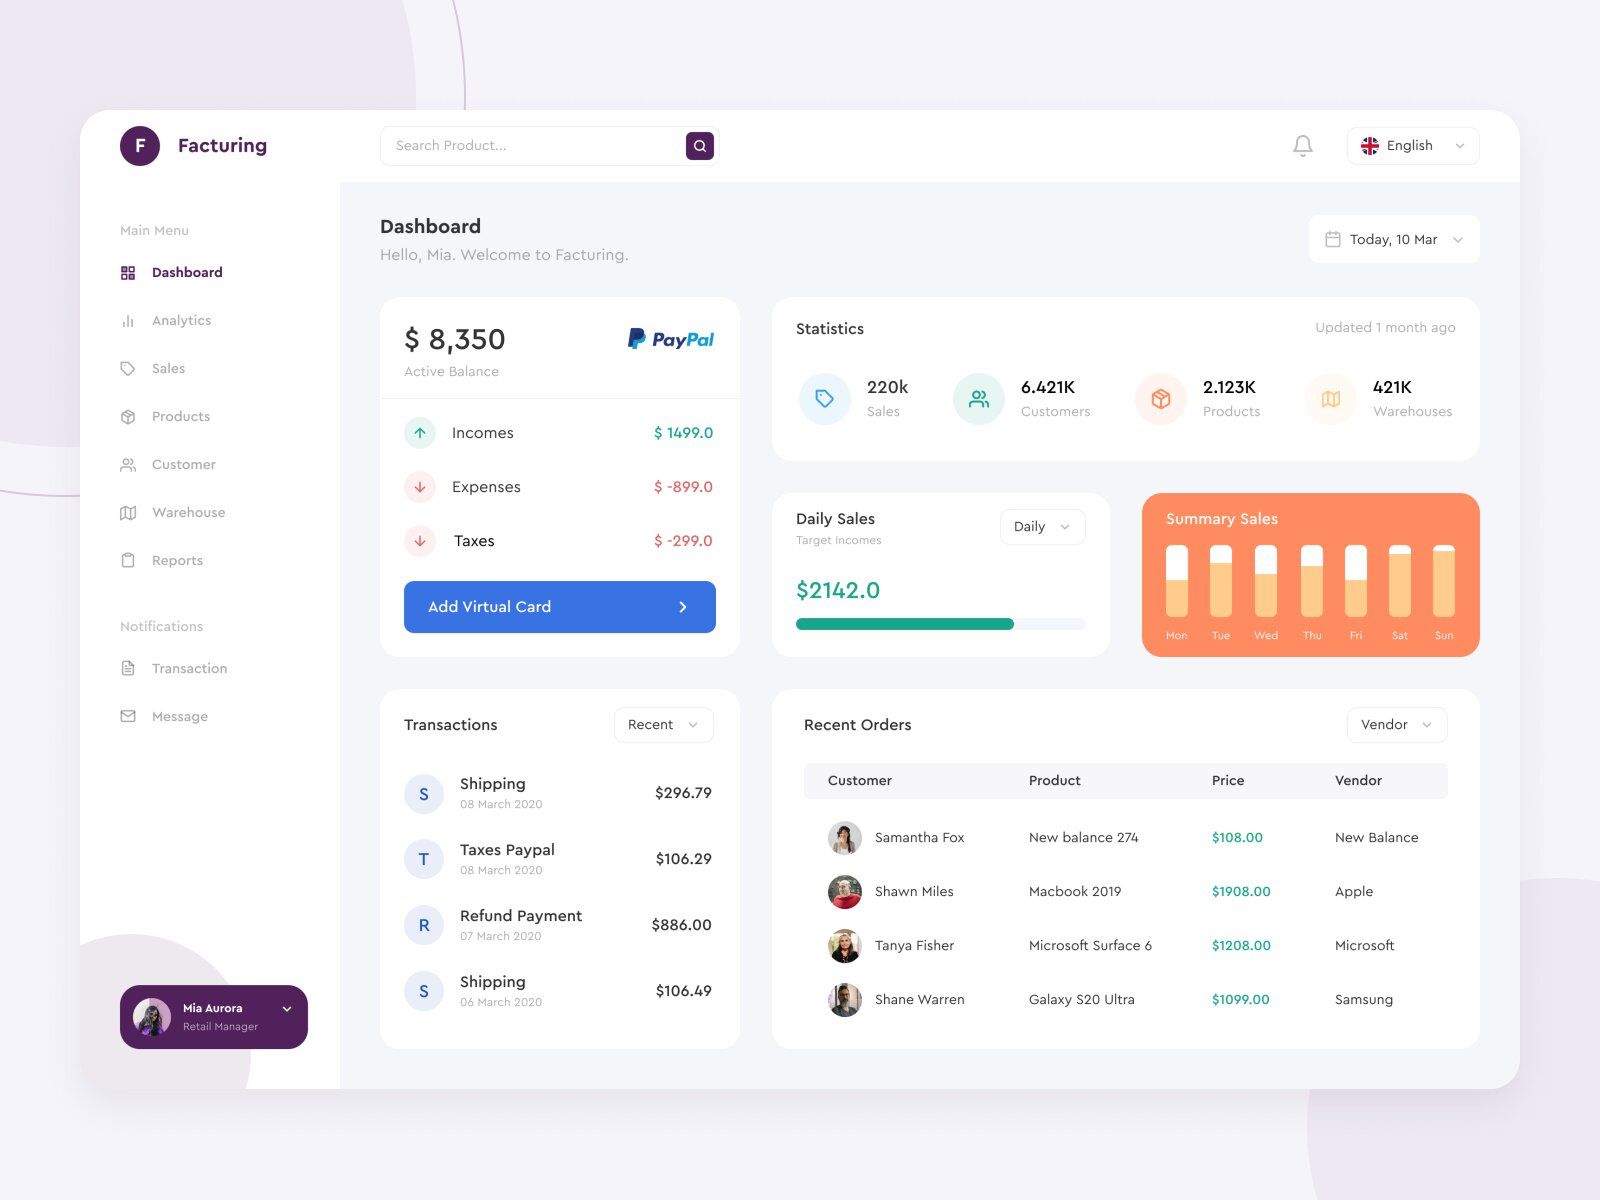 To create accounting software for e-Commerce, for example, you should have a well-developed invoices feature and financial turnover tracking (*image by [Barly Vallendito](https://dribbble.com/vallendito){ rel="nofollow" target="_blank" .default-md}*)